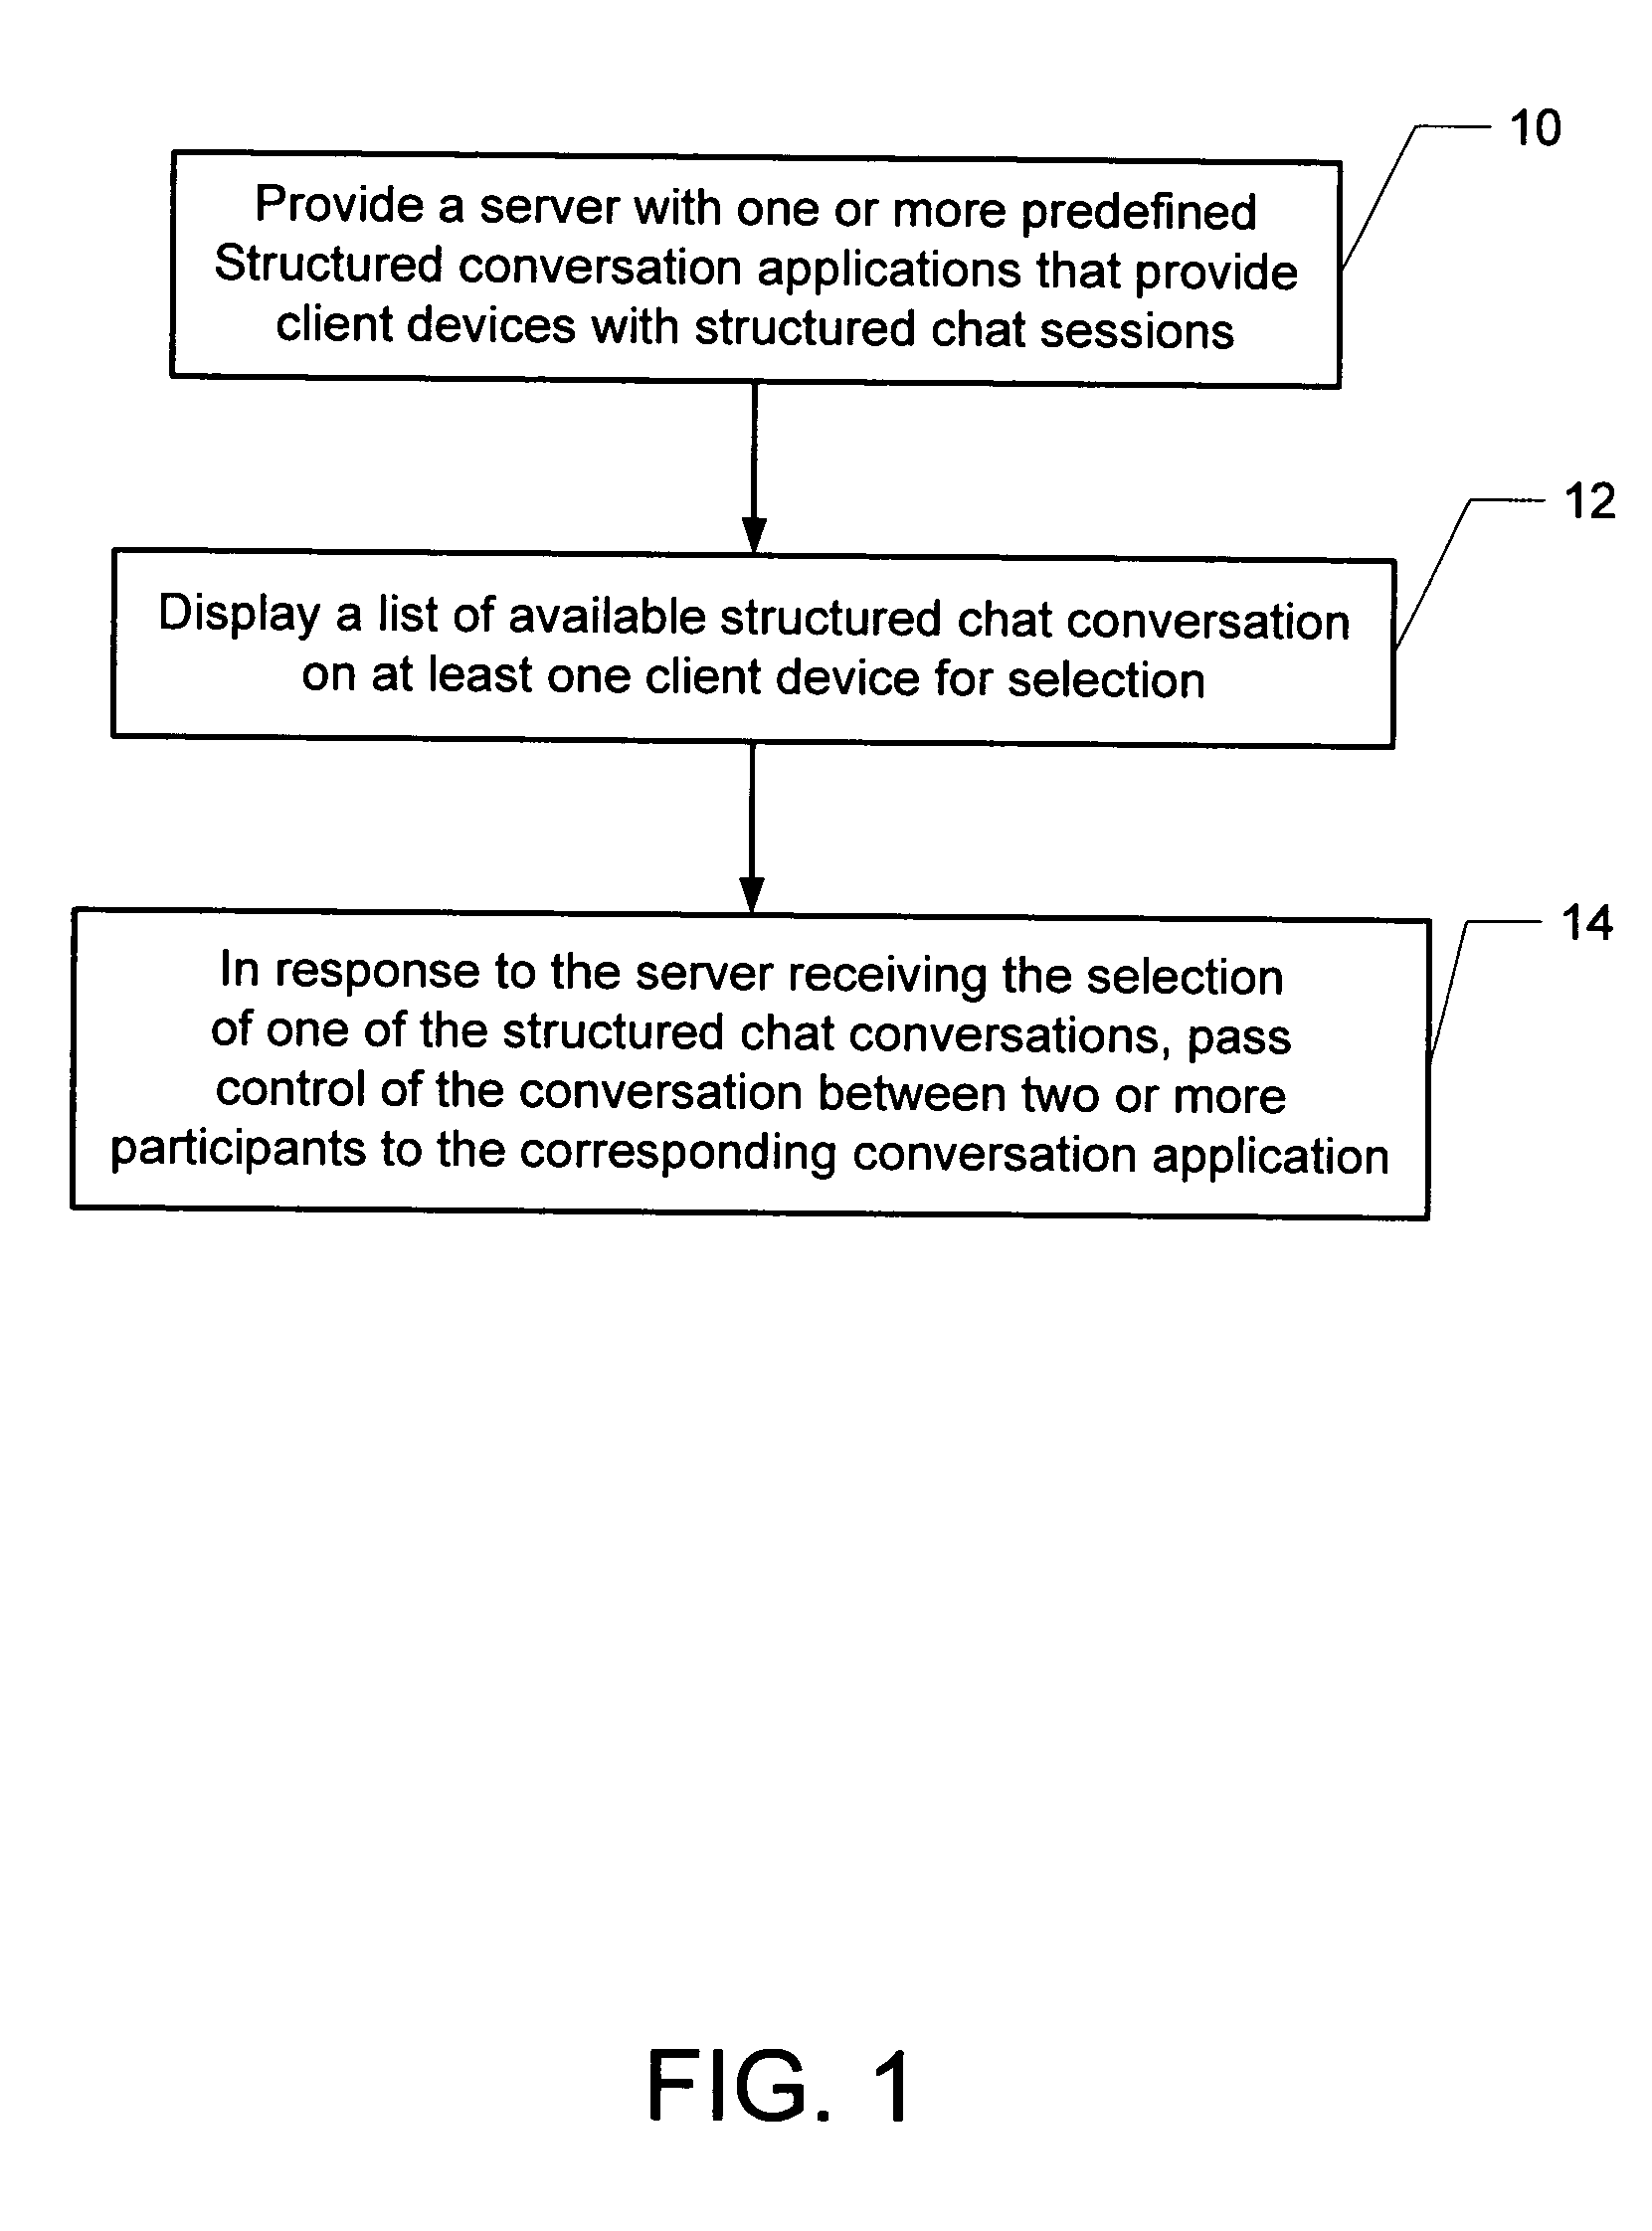 Method and system for enabling structured real-time conversations between multiple participants